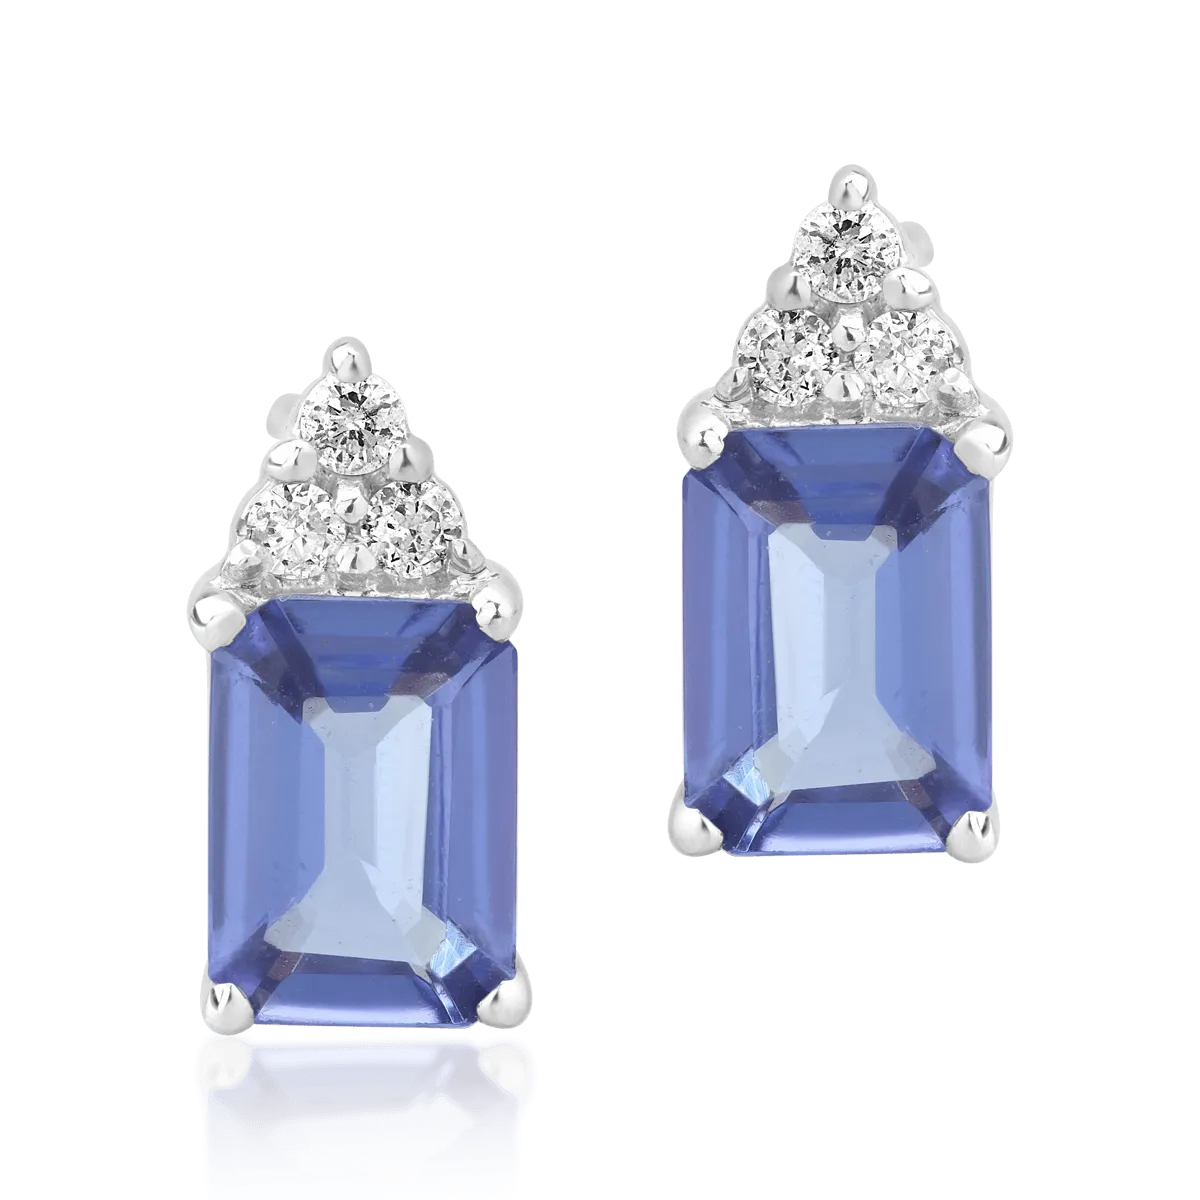 14K white gold earrings with 1.87ct tanzanite and 0.12ct diamonds